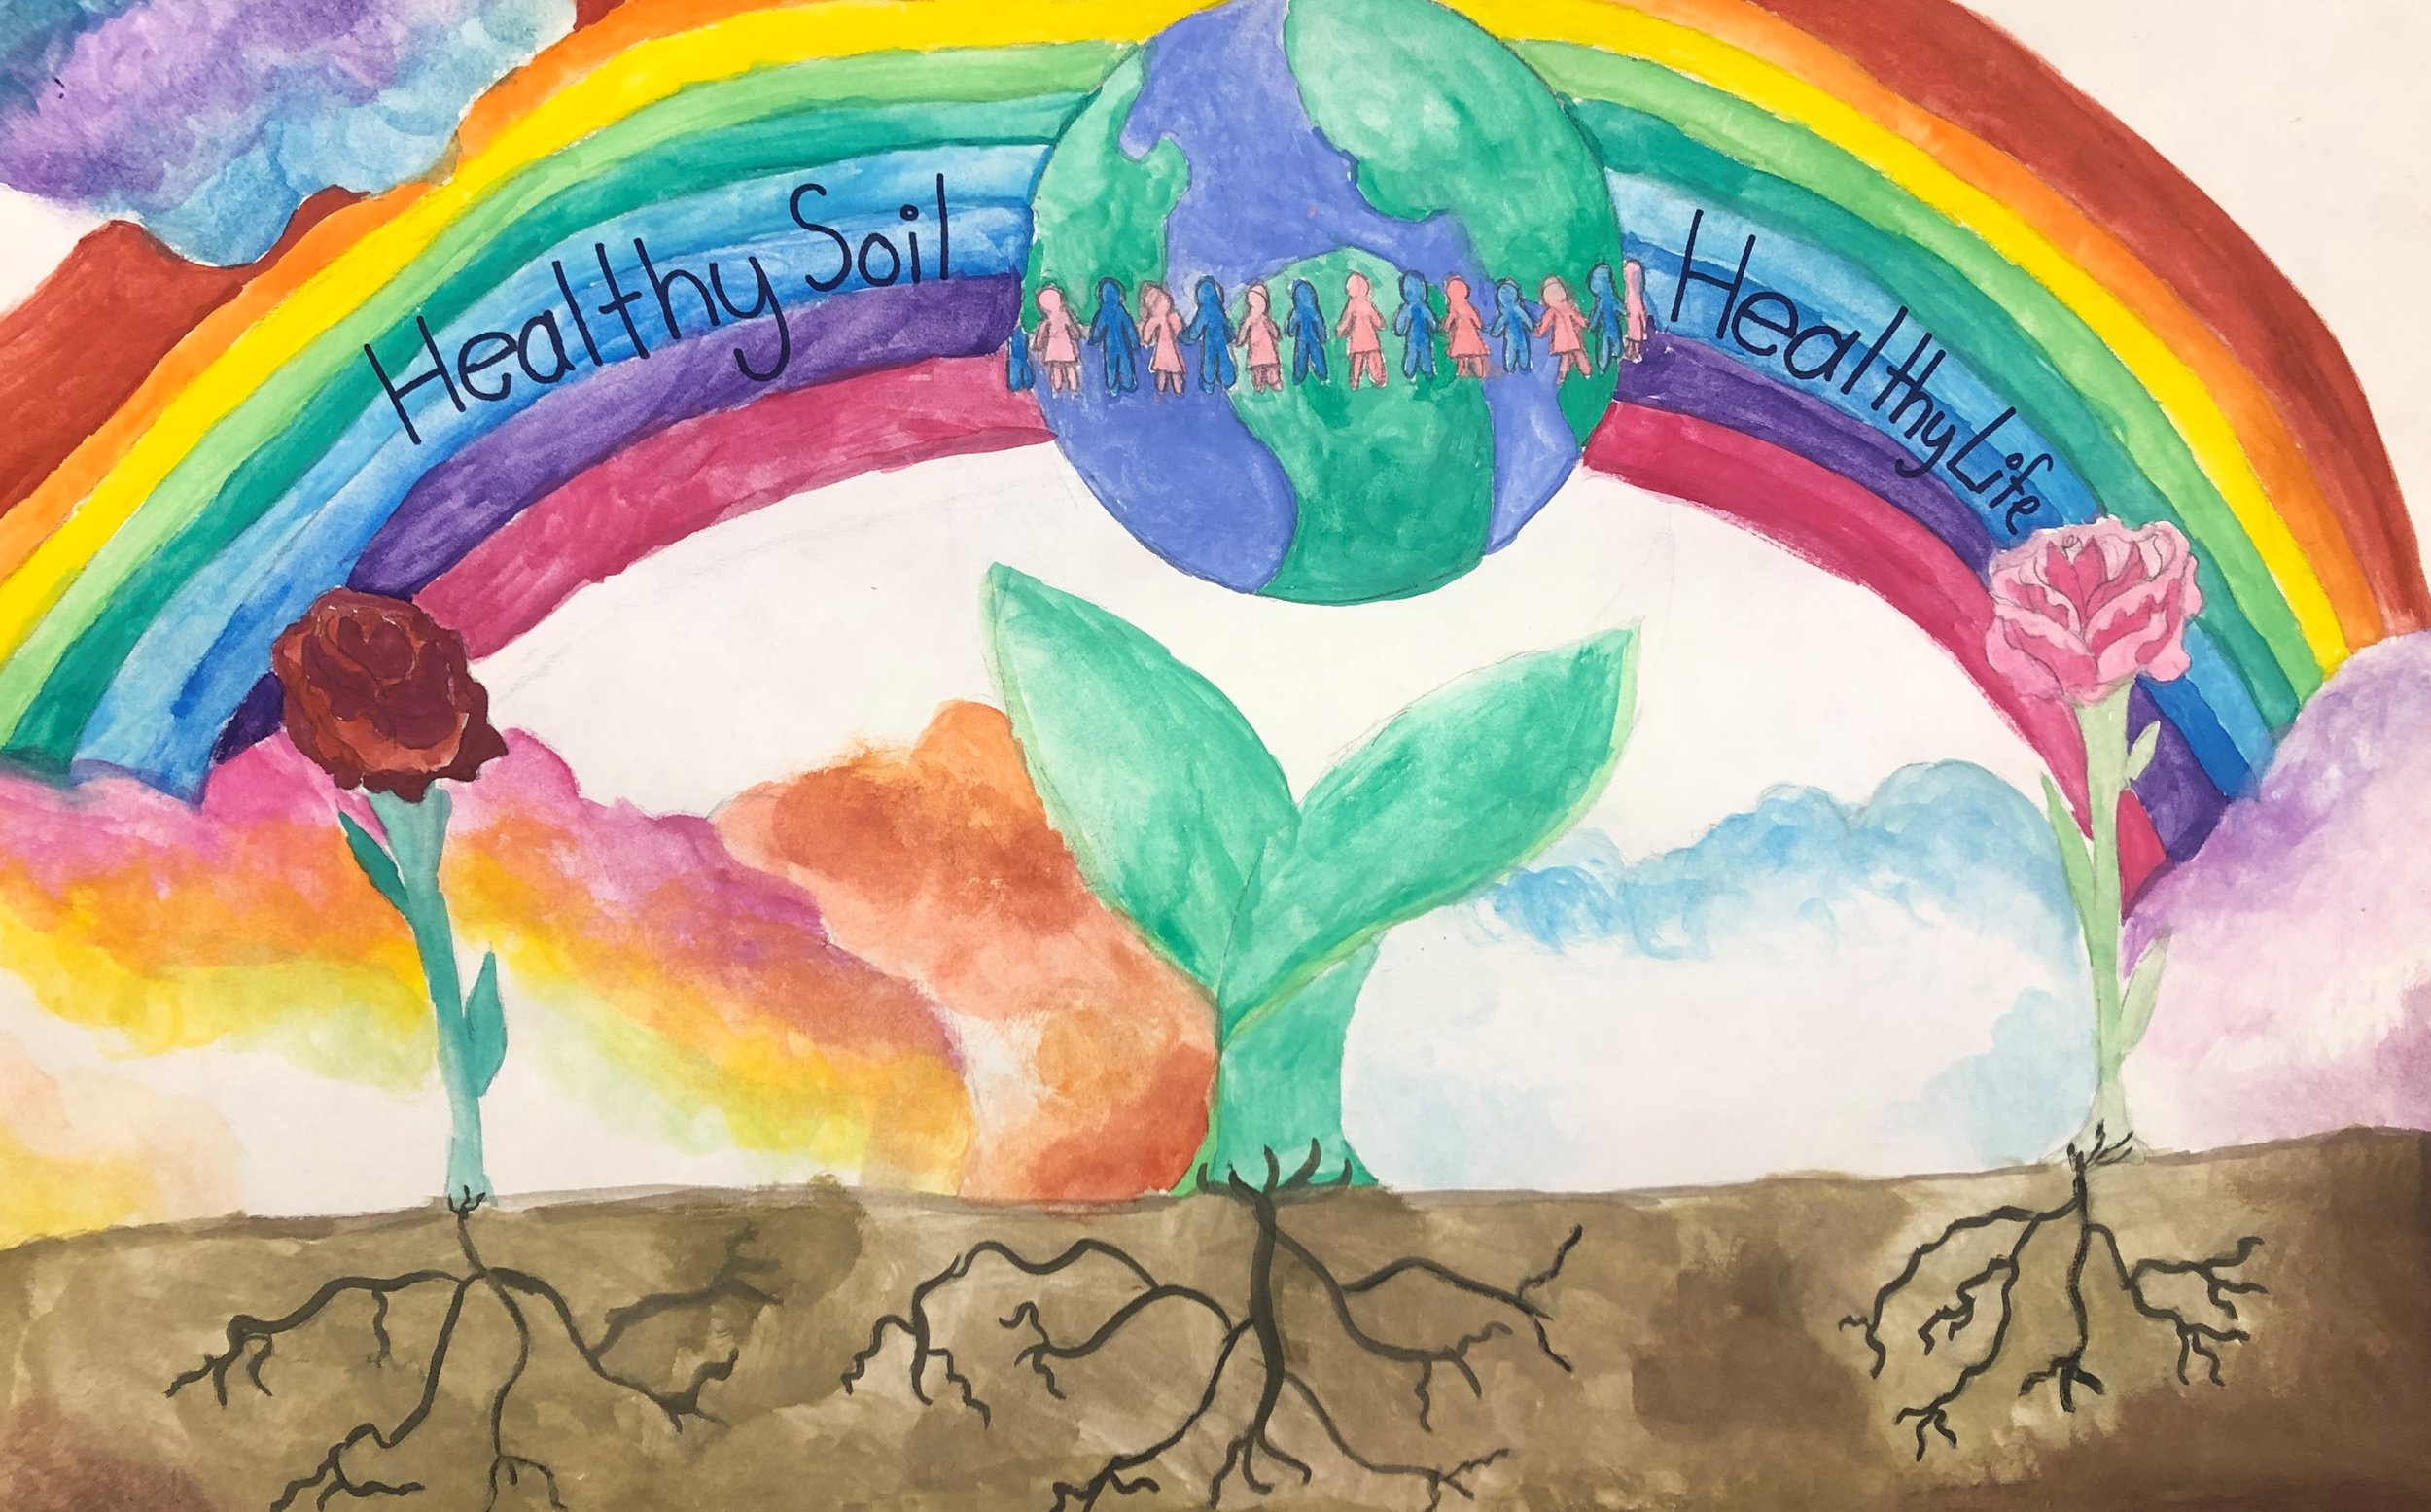 NACD Poster Contest — Talbot Soil Conservation District